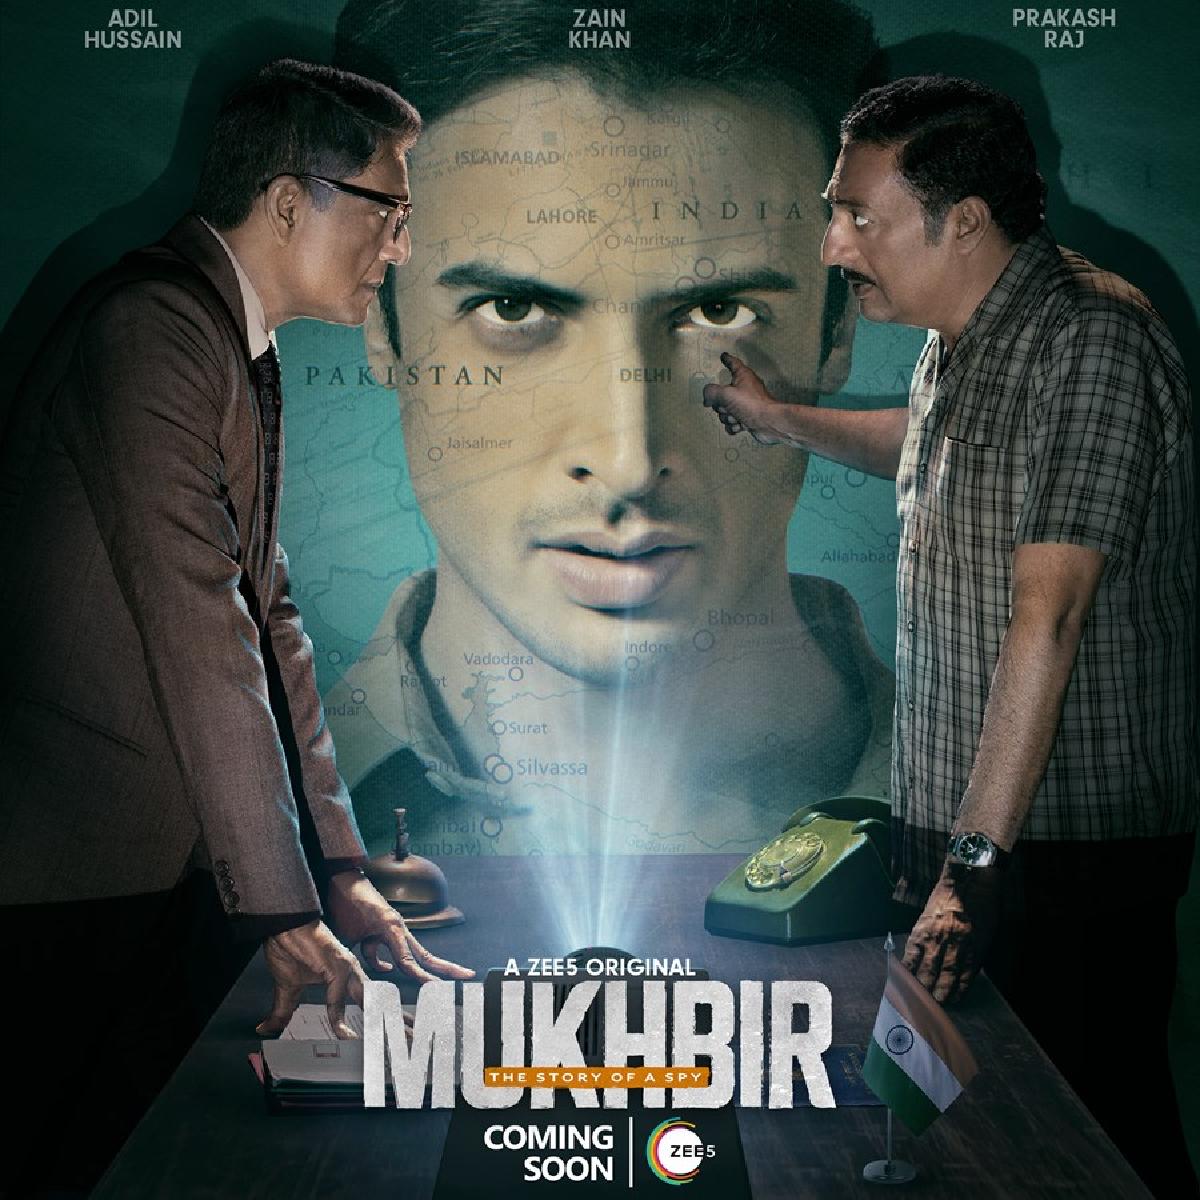 Prakask Raj And Adil Hussain Starrer Mukhbir – The Story Of A Spy, Poster Out